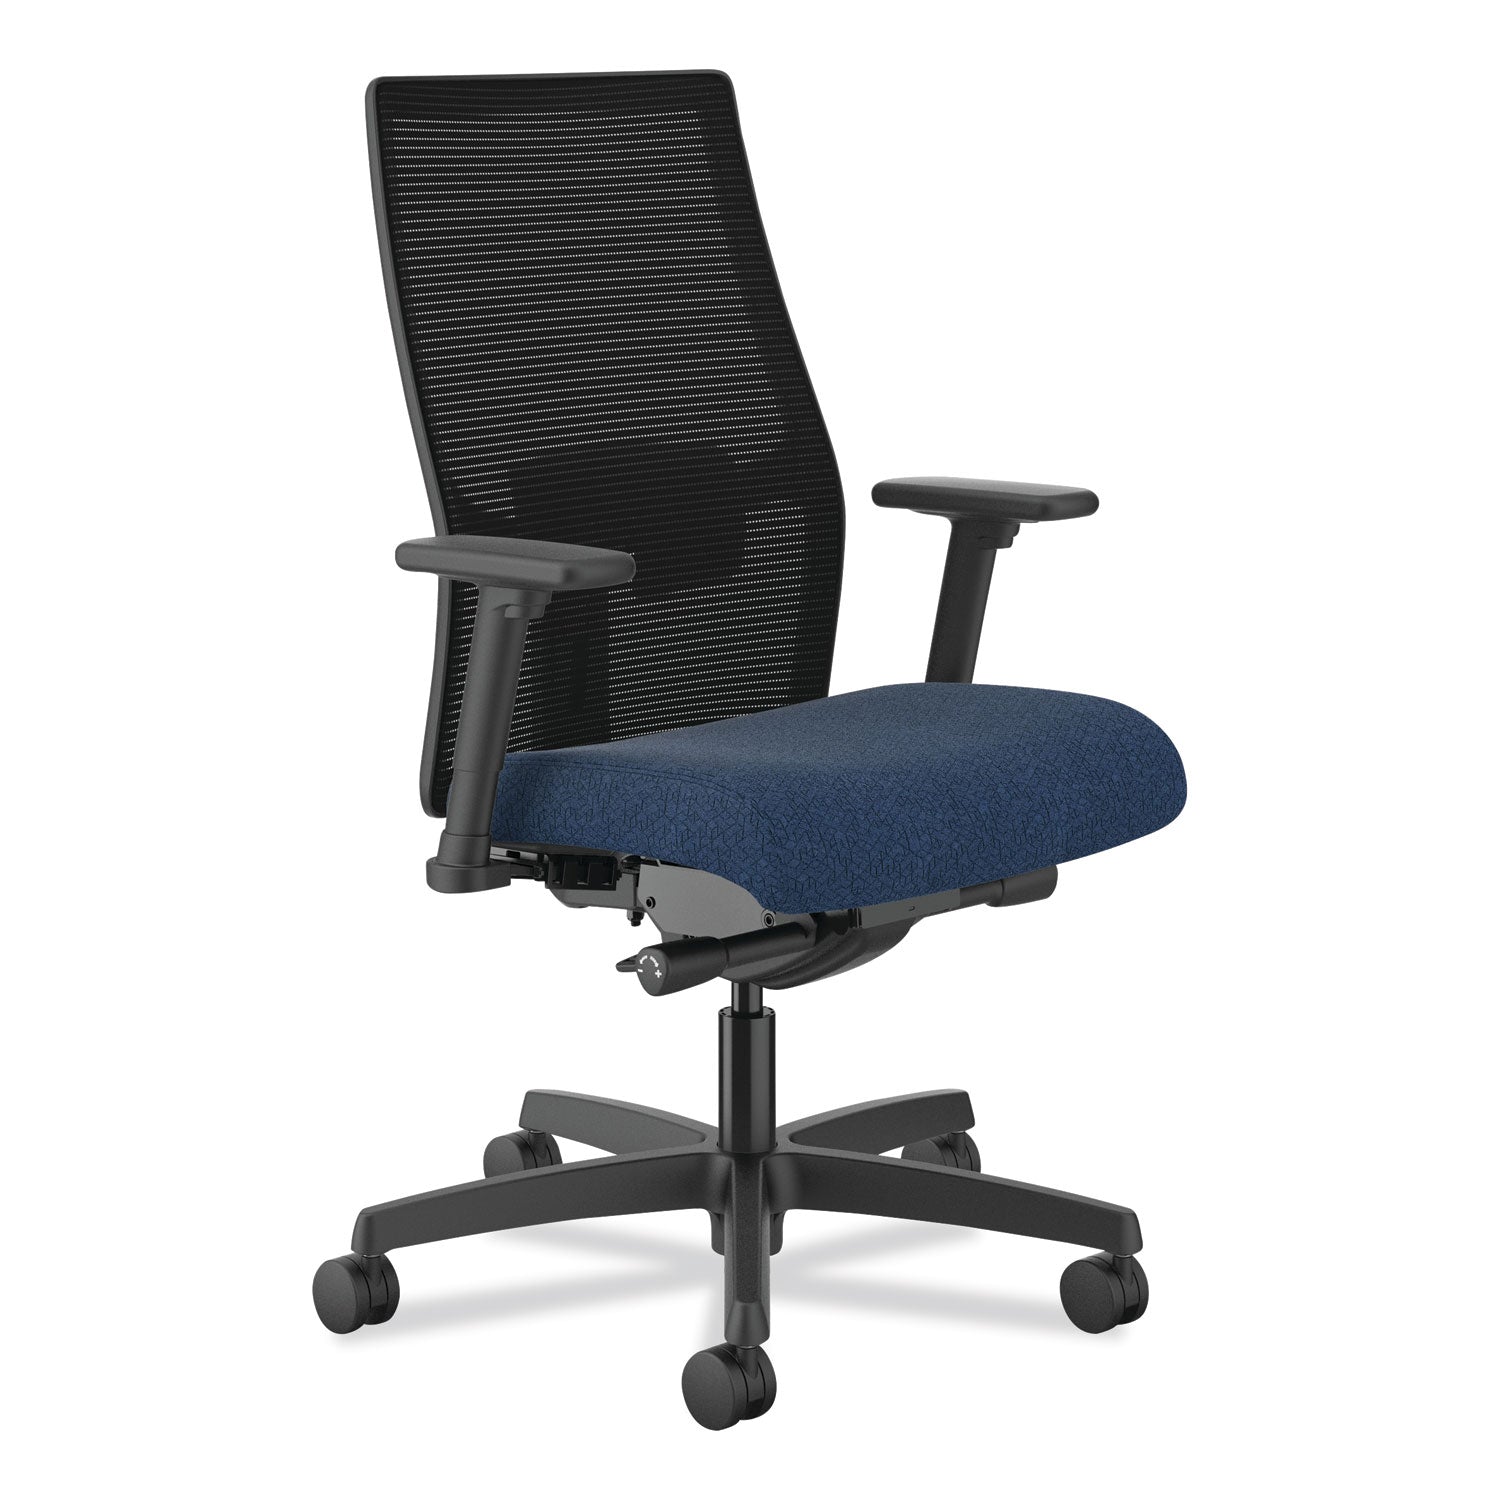 ignition-20-4-way-stretch-mid-black-mesh-task-chair-supports-300-lb-17-to-21-seat-ht-navy-black-ships-in-7-10-bus-days_honi2m2bmla13tk - 1